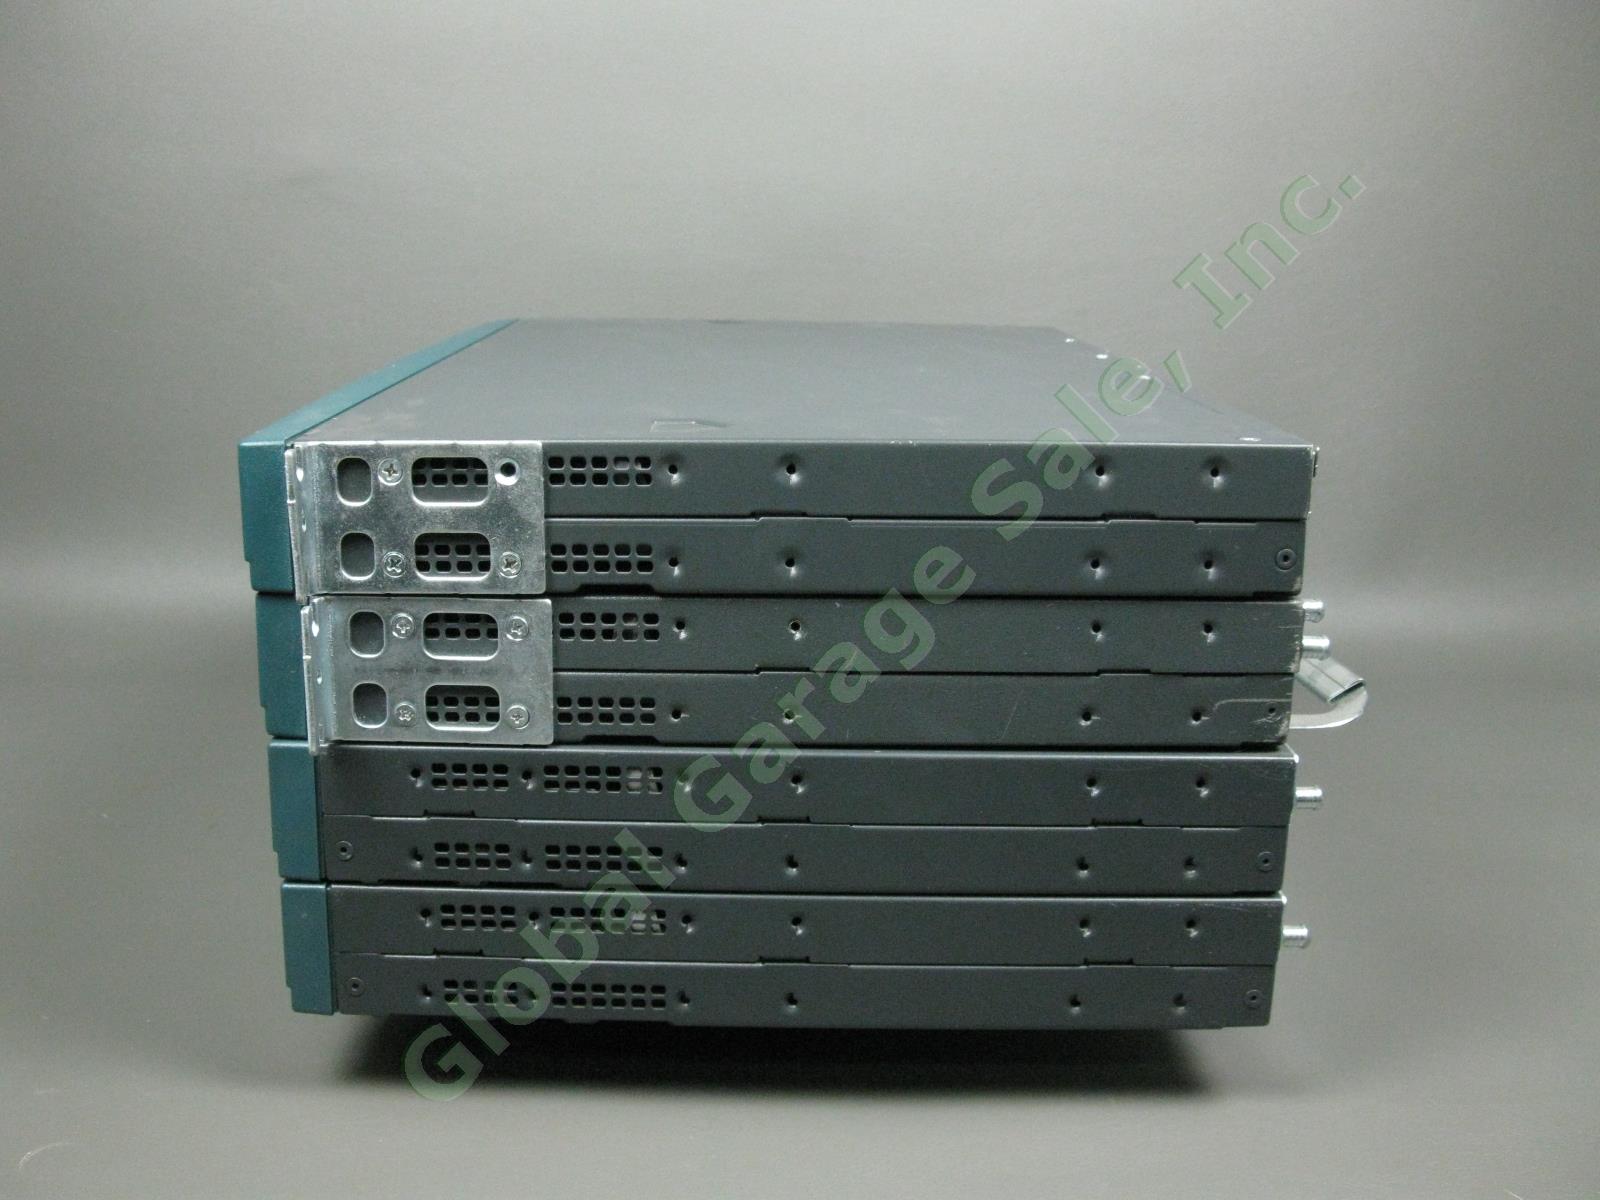 4 Cisco 2600 XM-Series Wired 4-Port Ethernet Router 10/100Mbps CISCO2611XM NR! 3